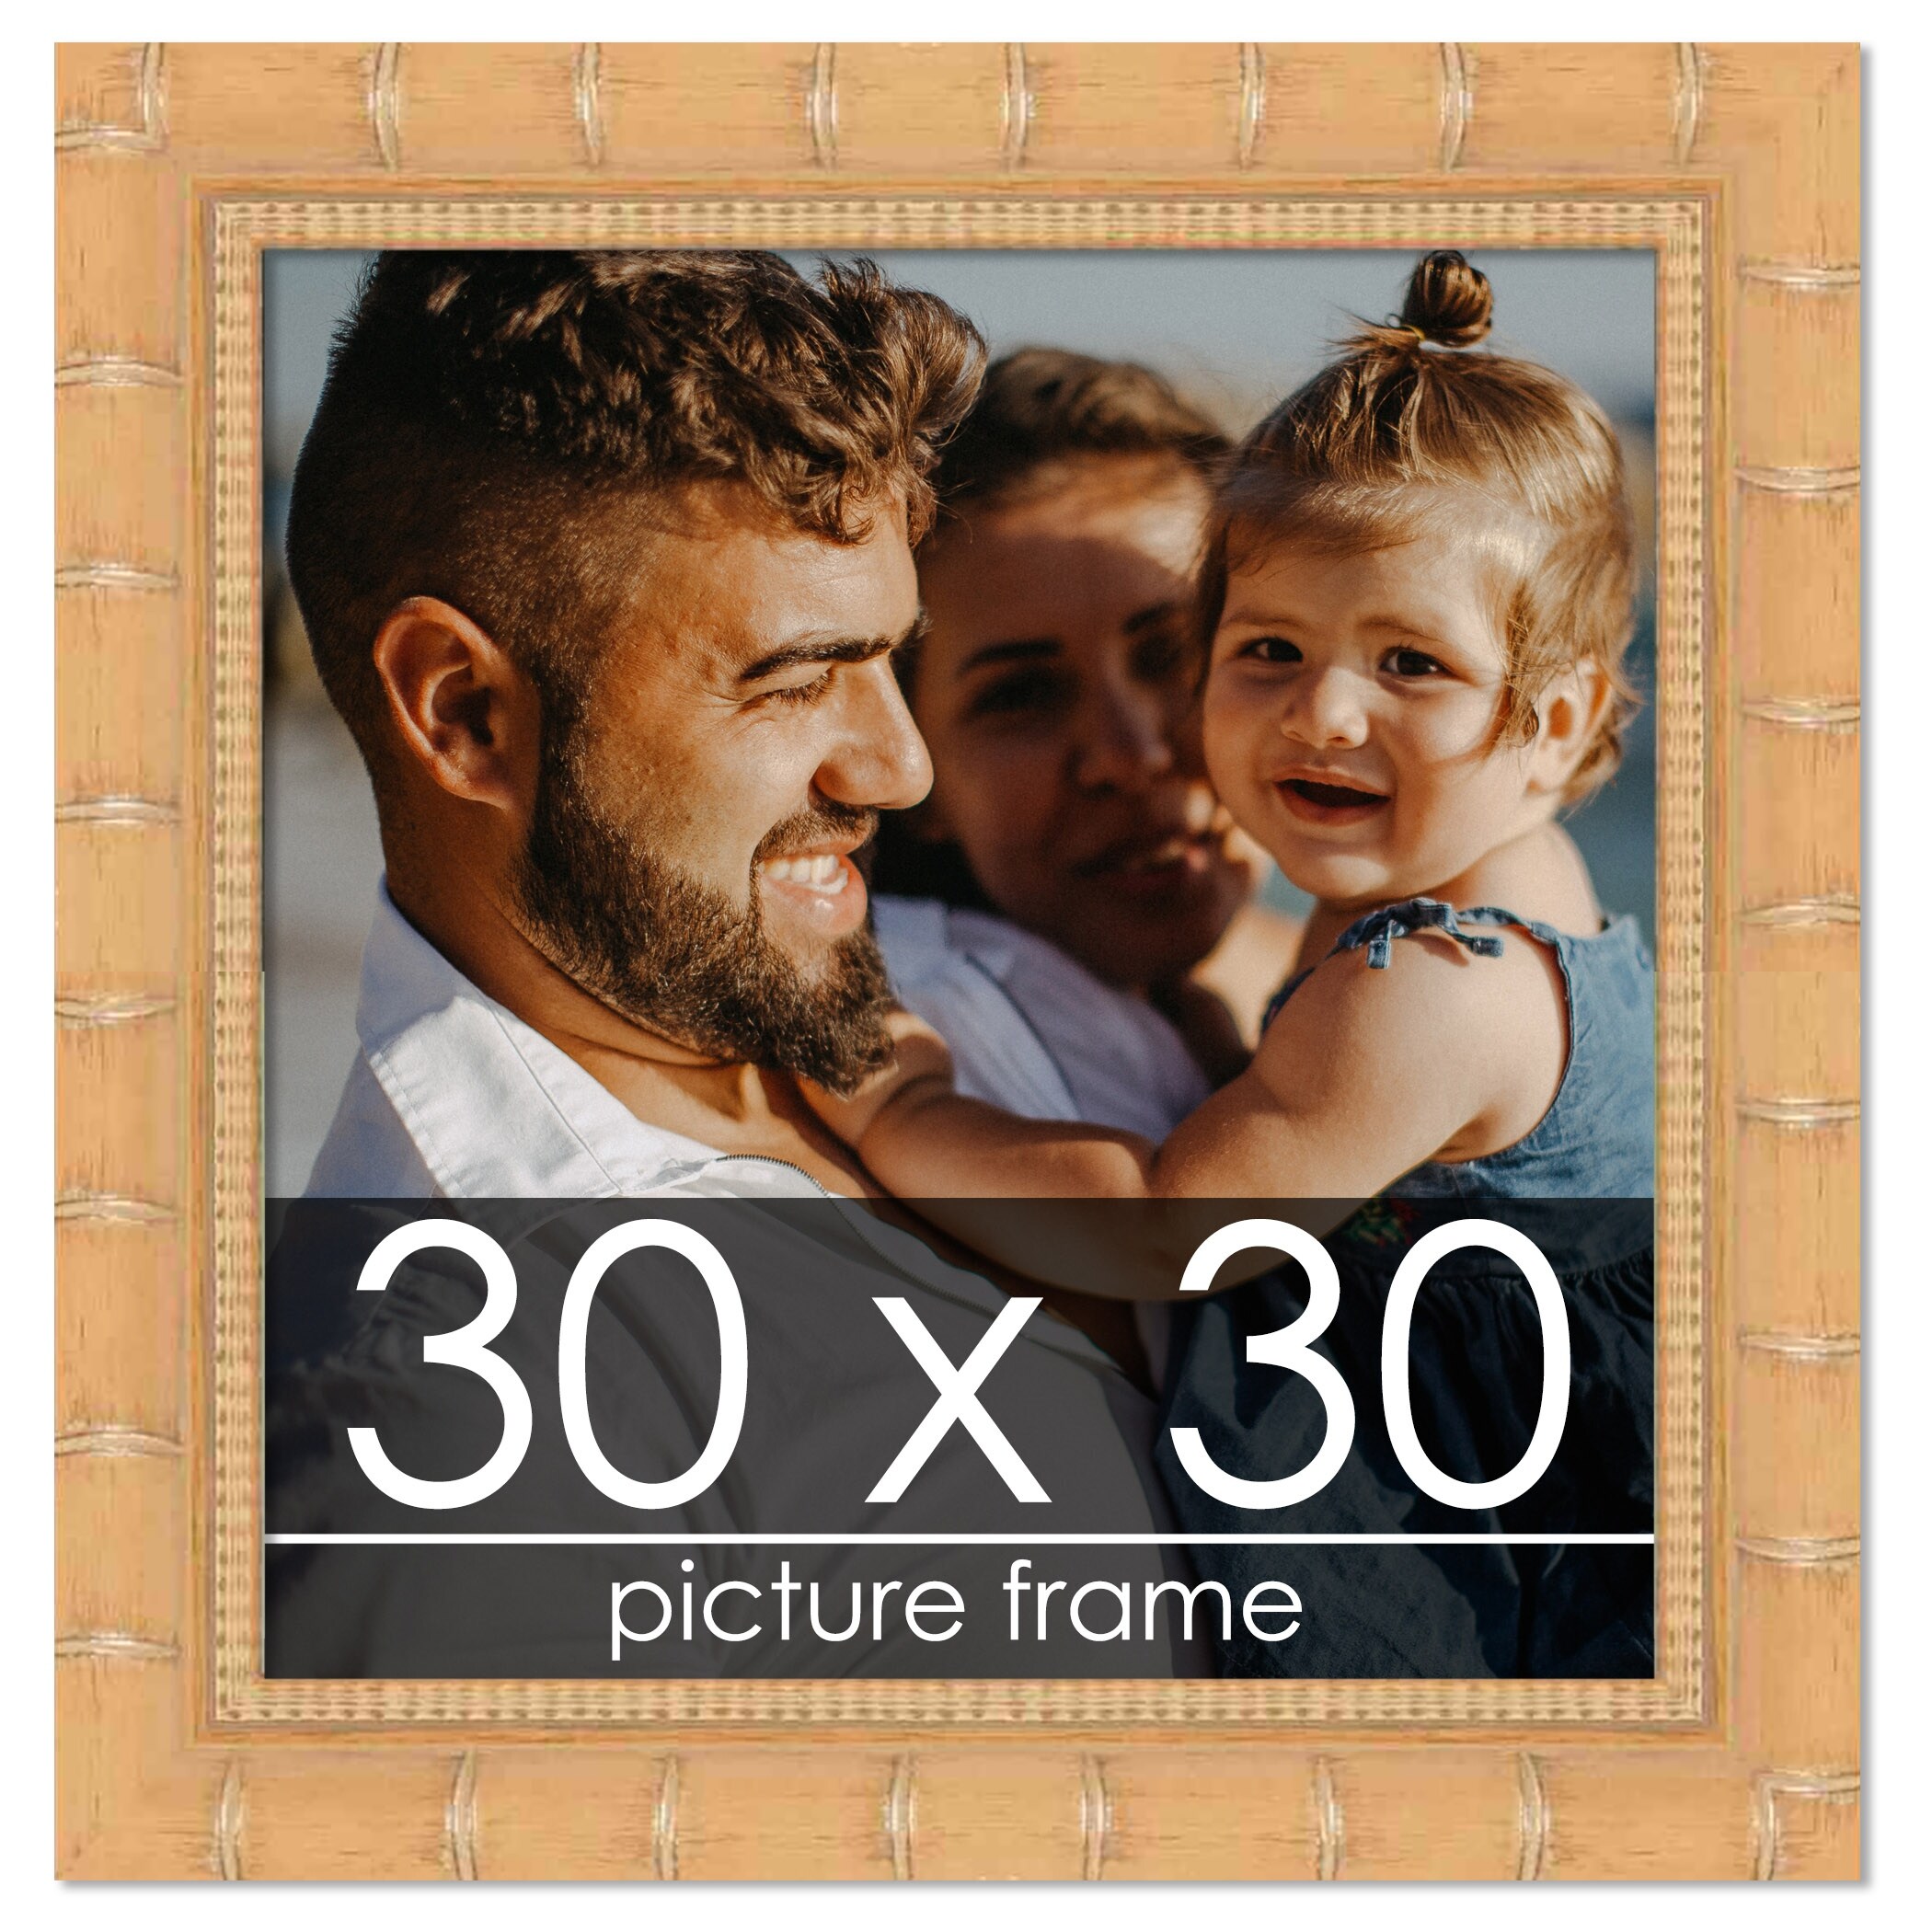 Poster Palooza 30x30 Contemporary Black Wood Picture Square Frame - Picture  Frame Includes UV Acrylic, Foam Board Backing, & Hanging Hardware!